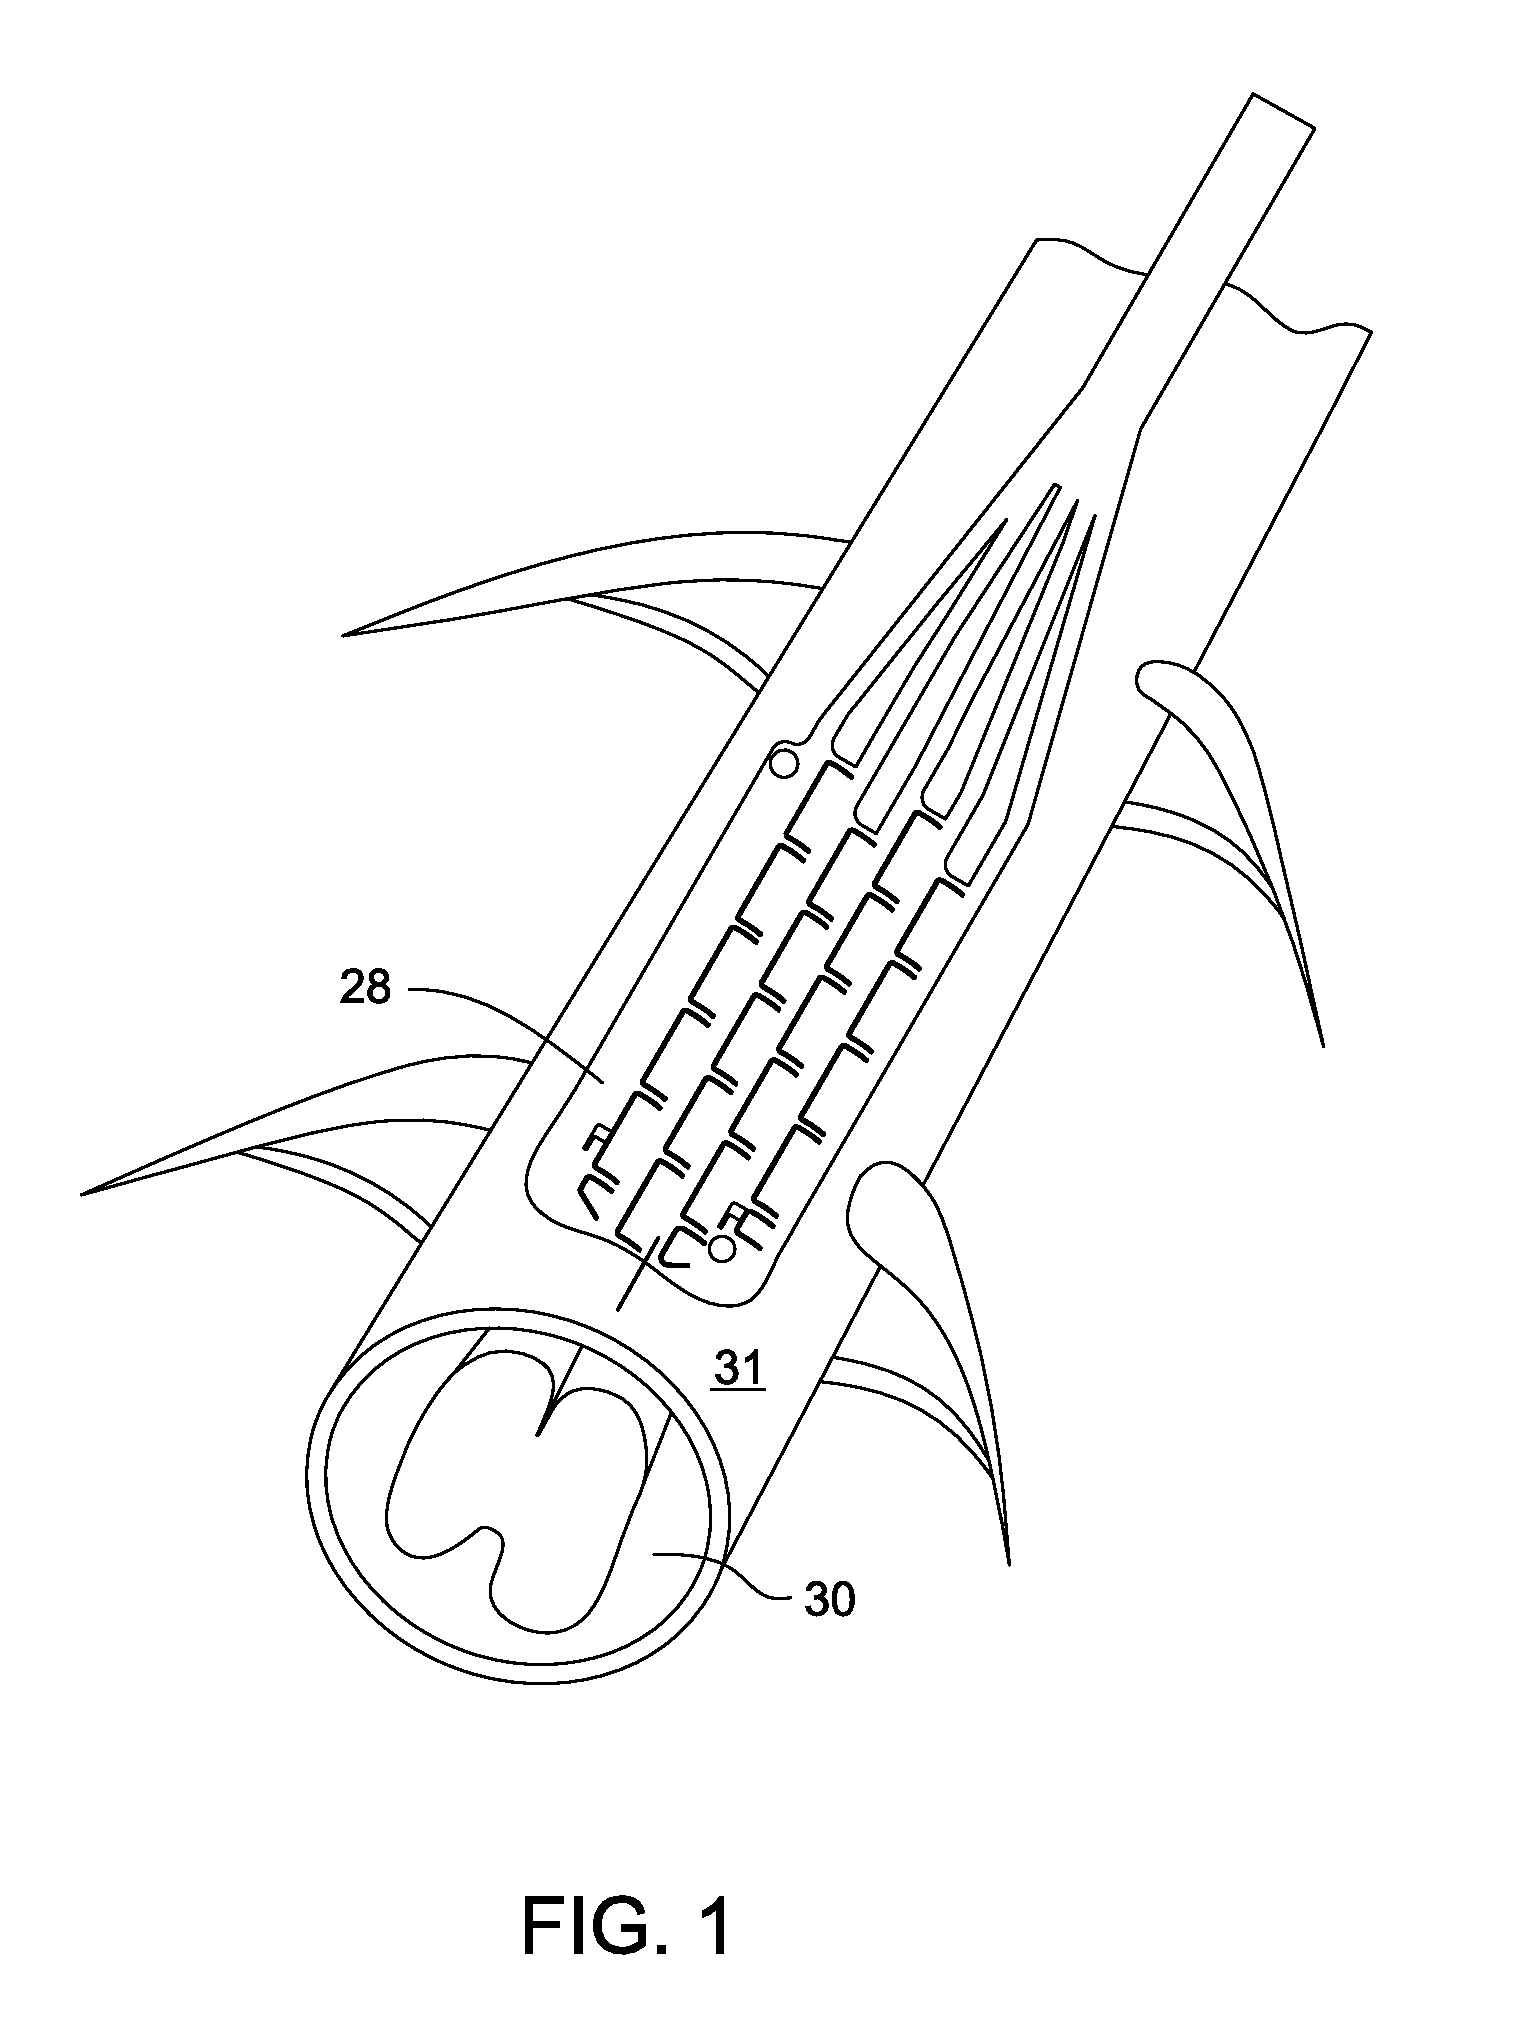 Electrode array and deployment assembly including an electrode array that is folded into a cannula that is narrower in width than the array